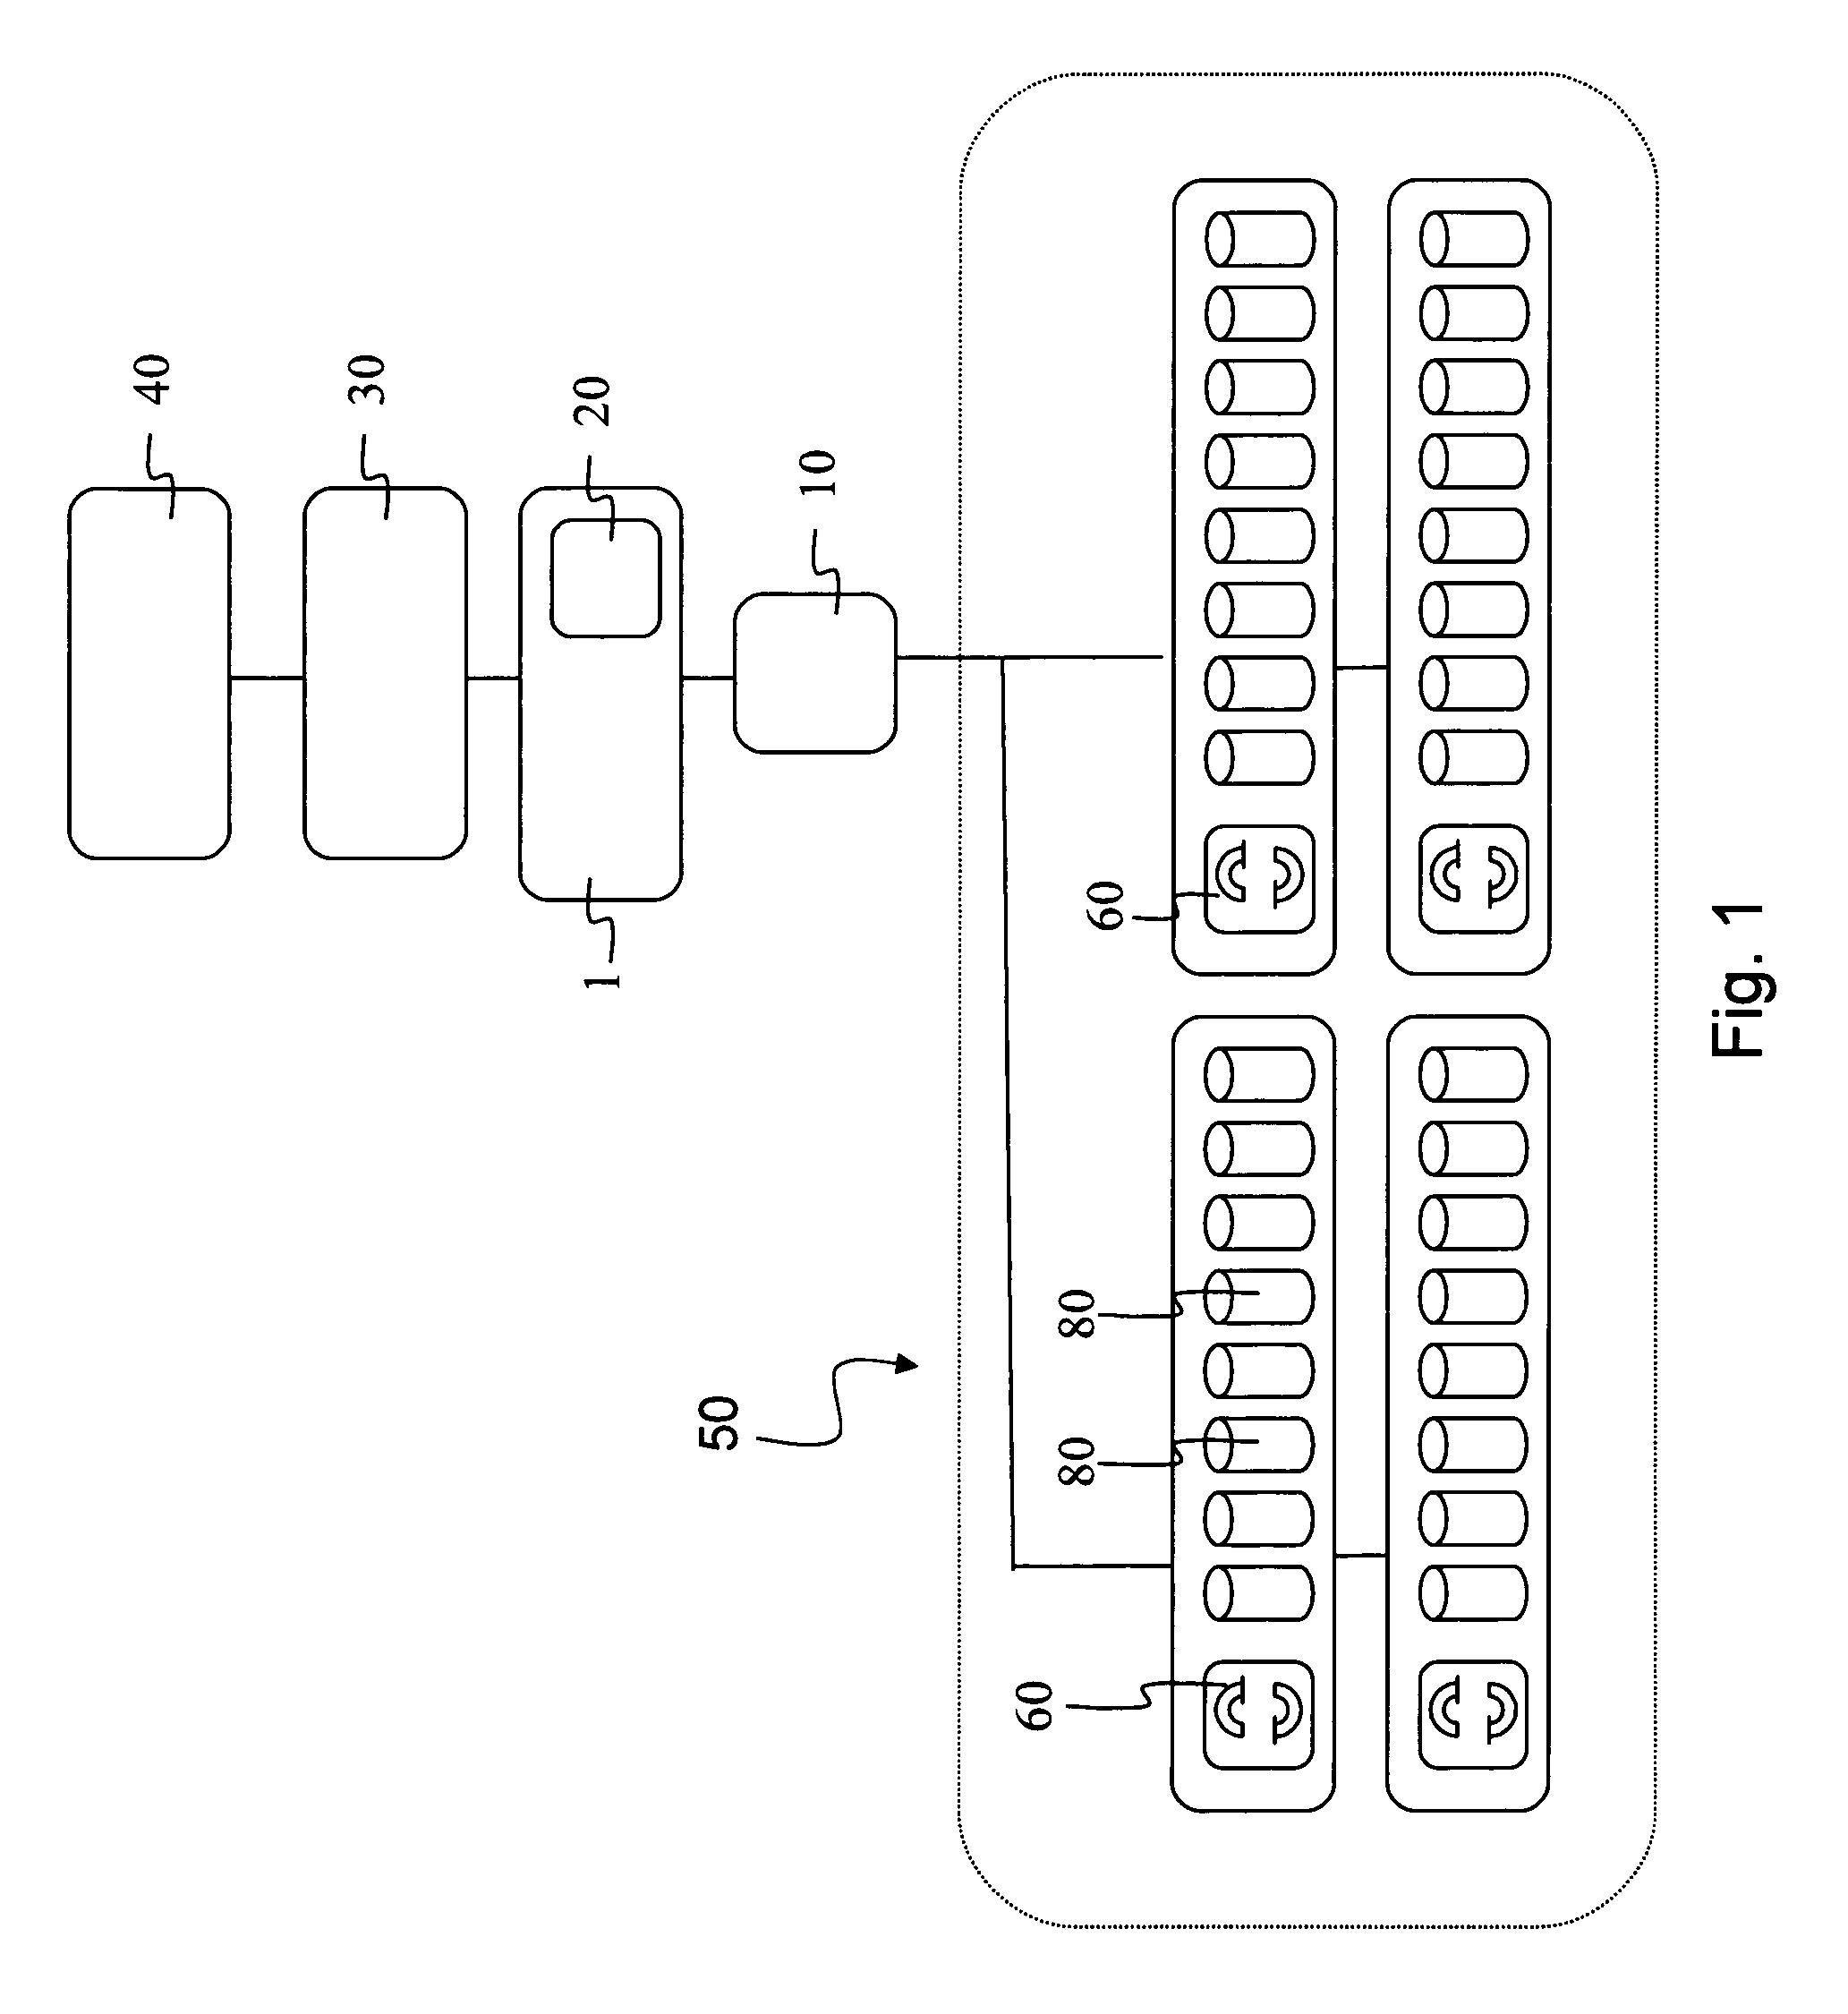 Device driver for use in a data storage system